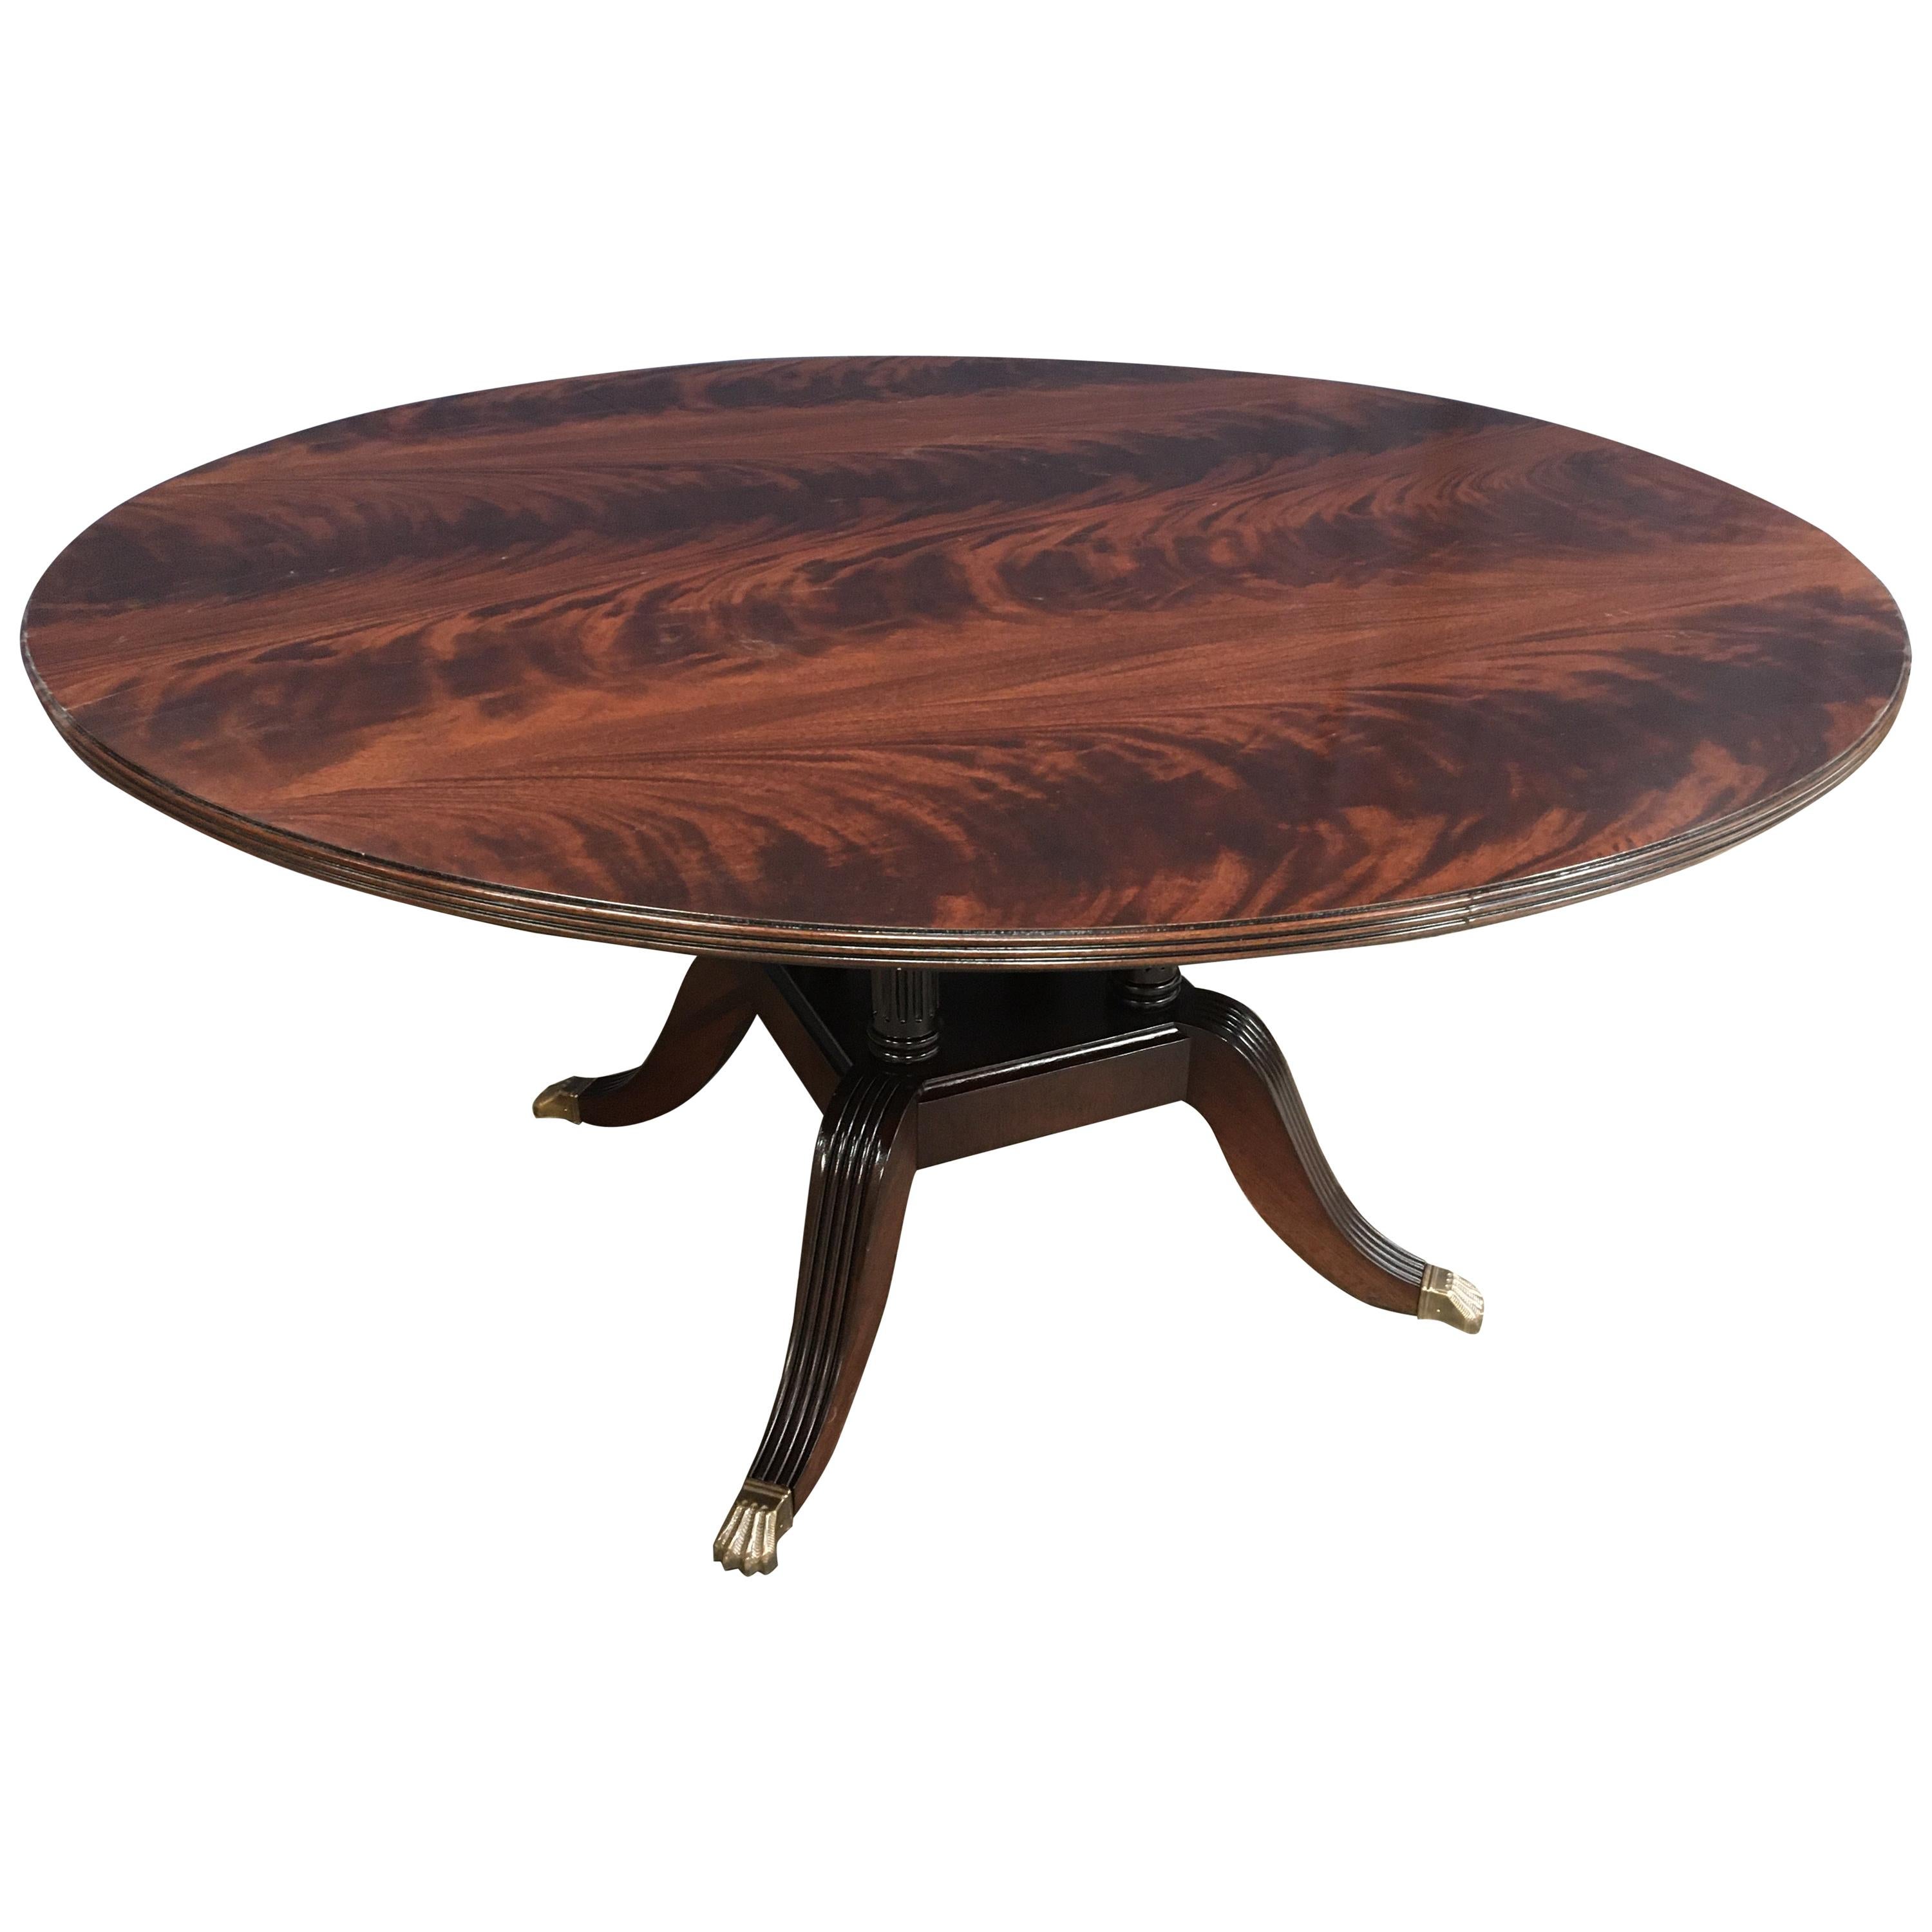 Round Crotch Mahogany Georgian Style Pedestal Dining Table by Leighton Hall